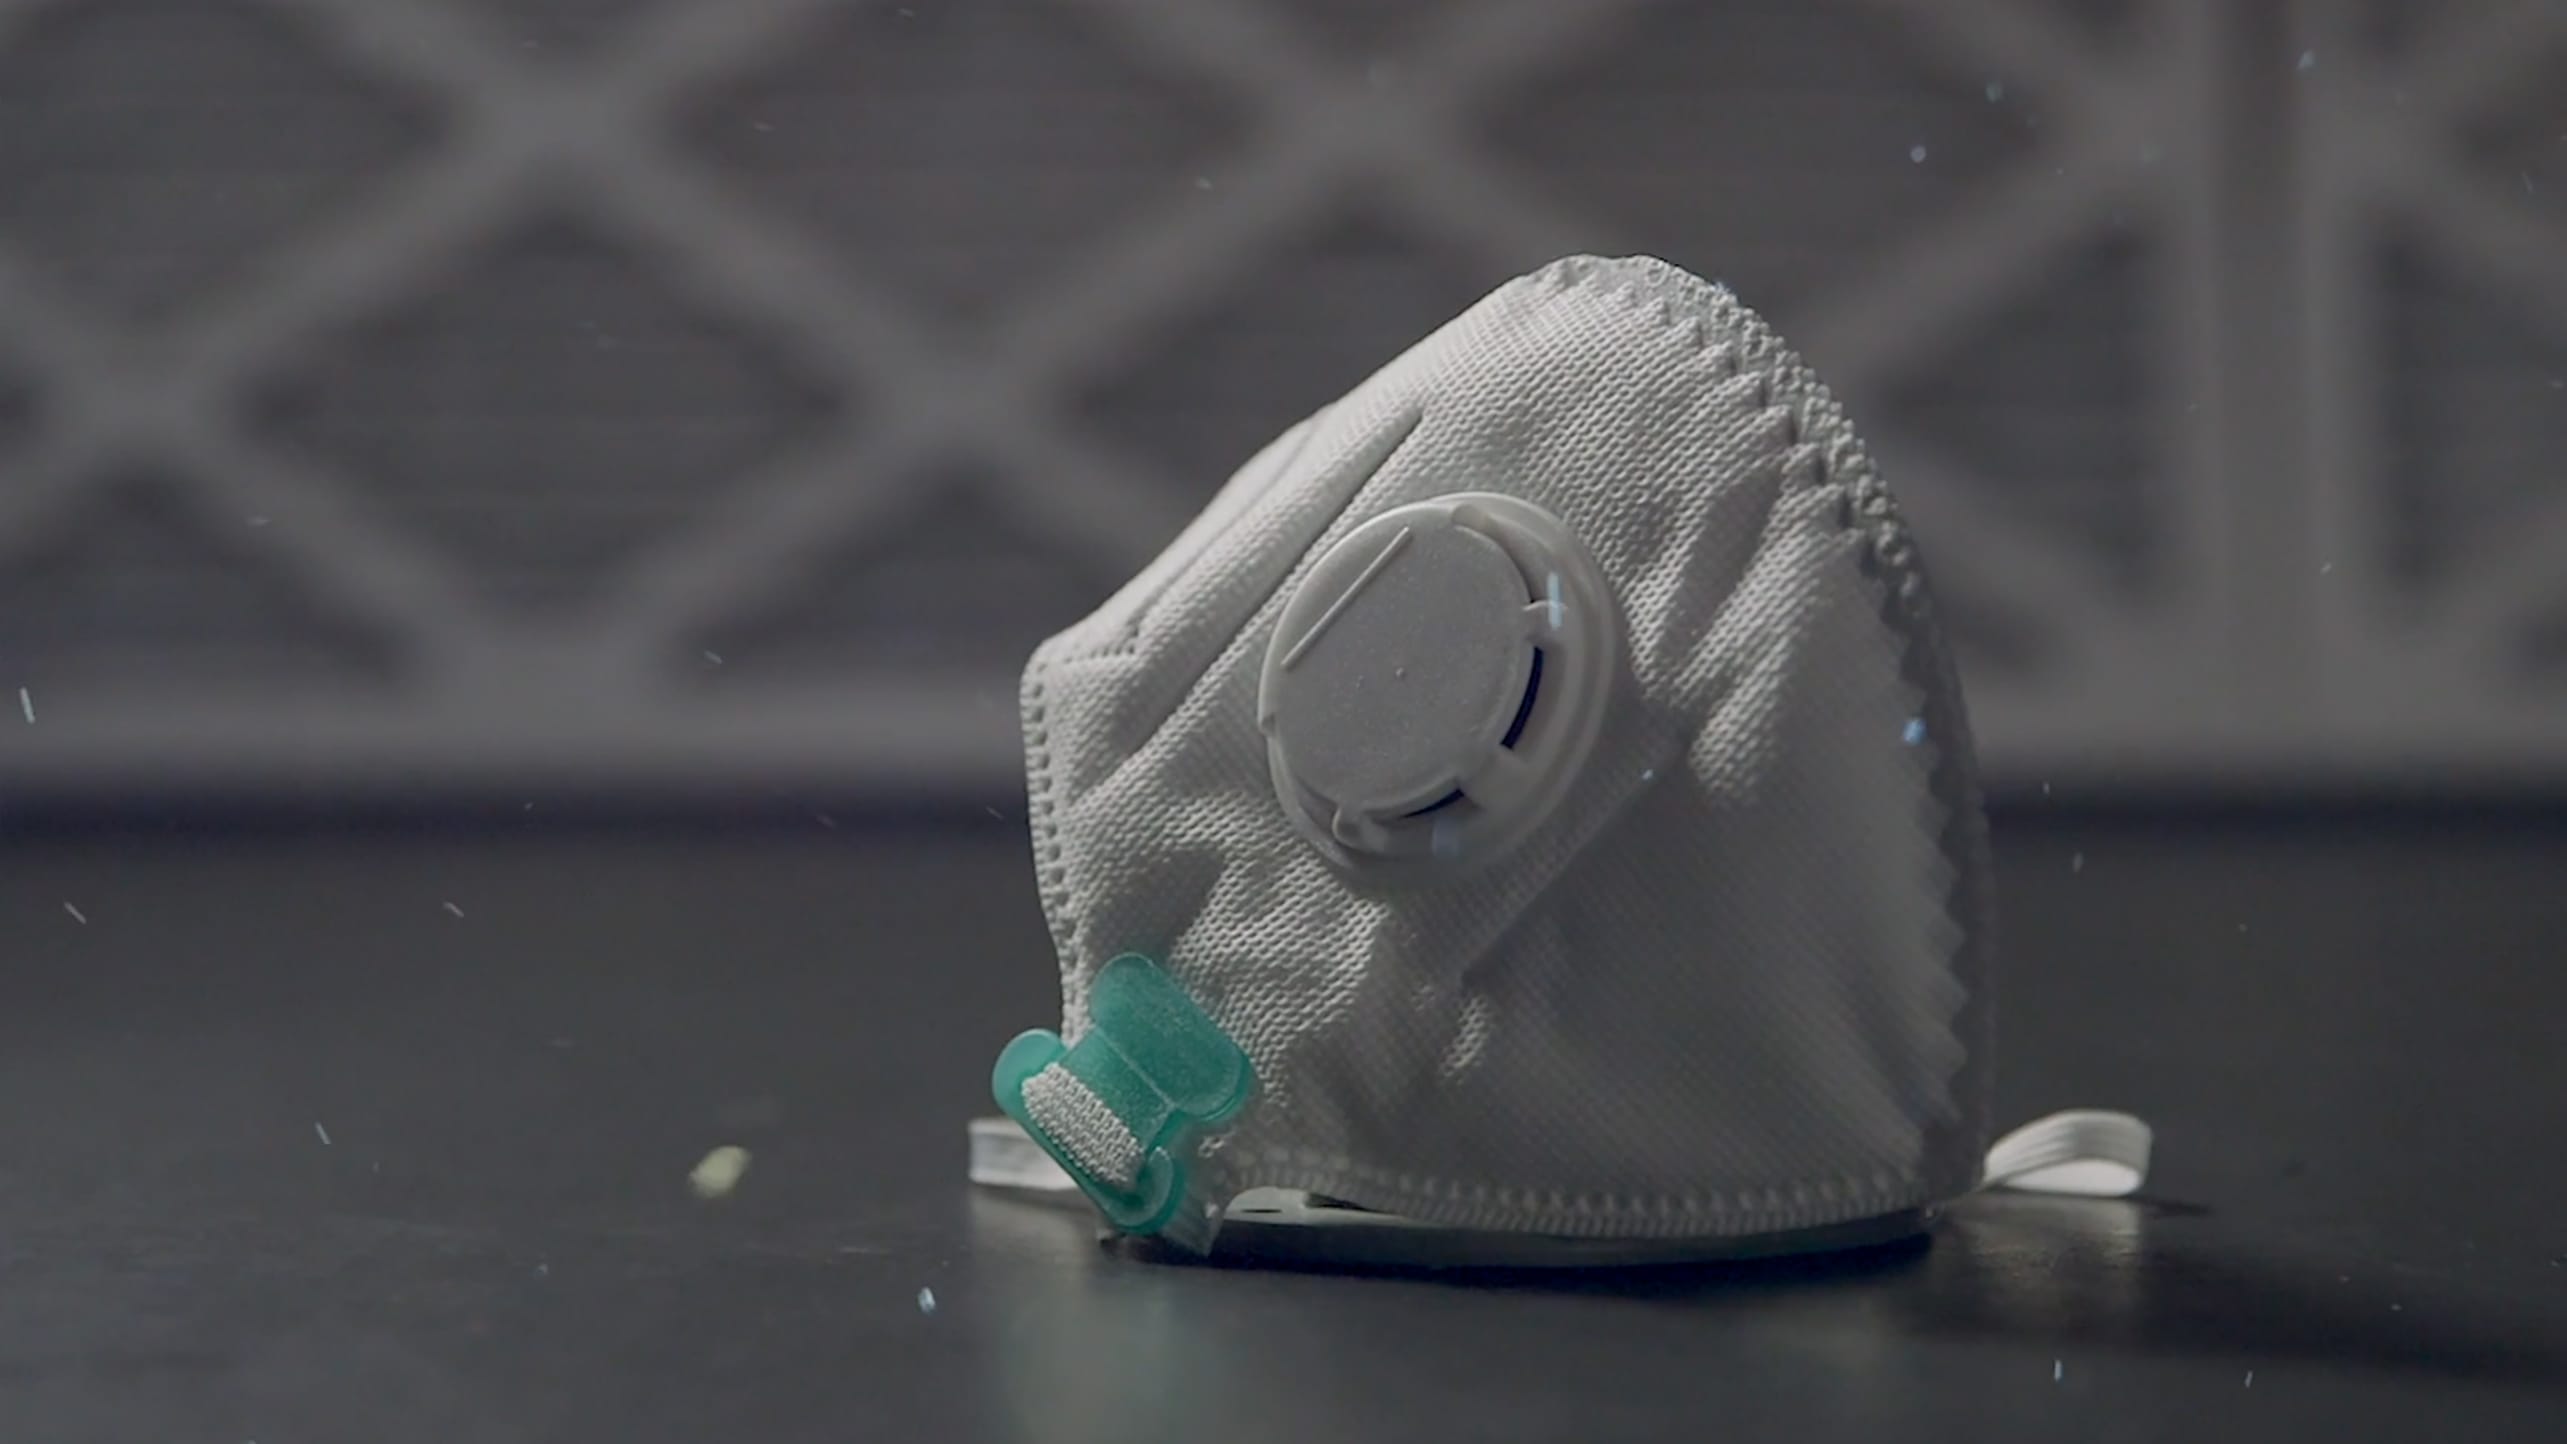 N95 respirator, an important PPE for health care workers